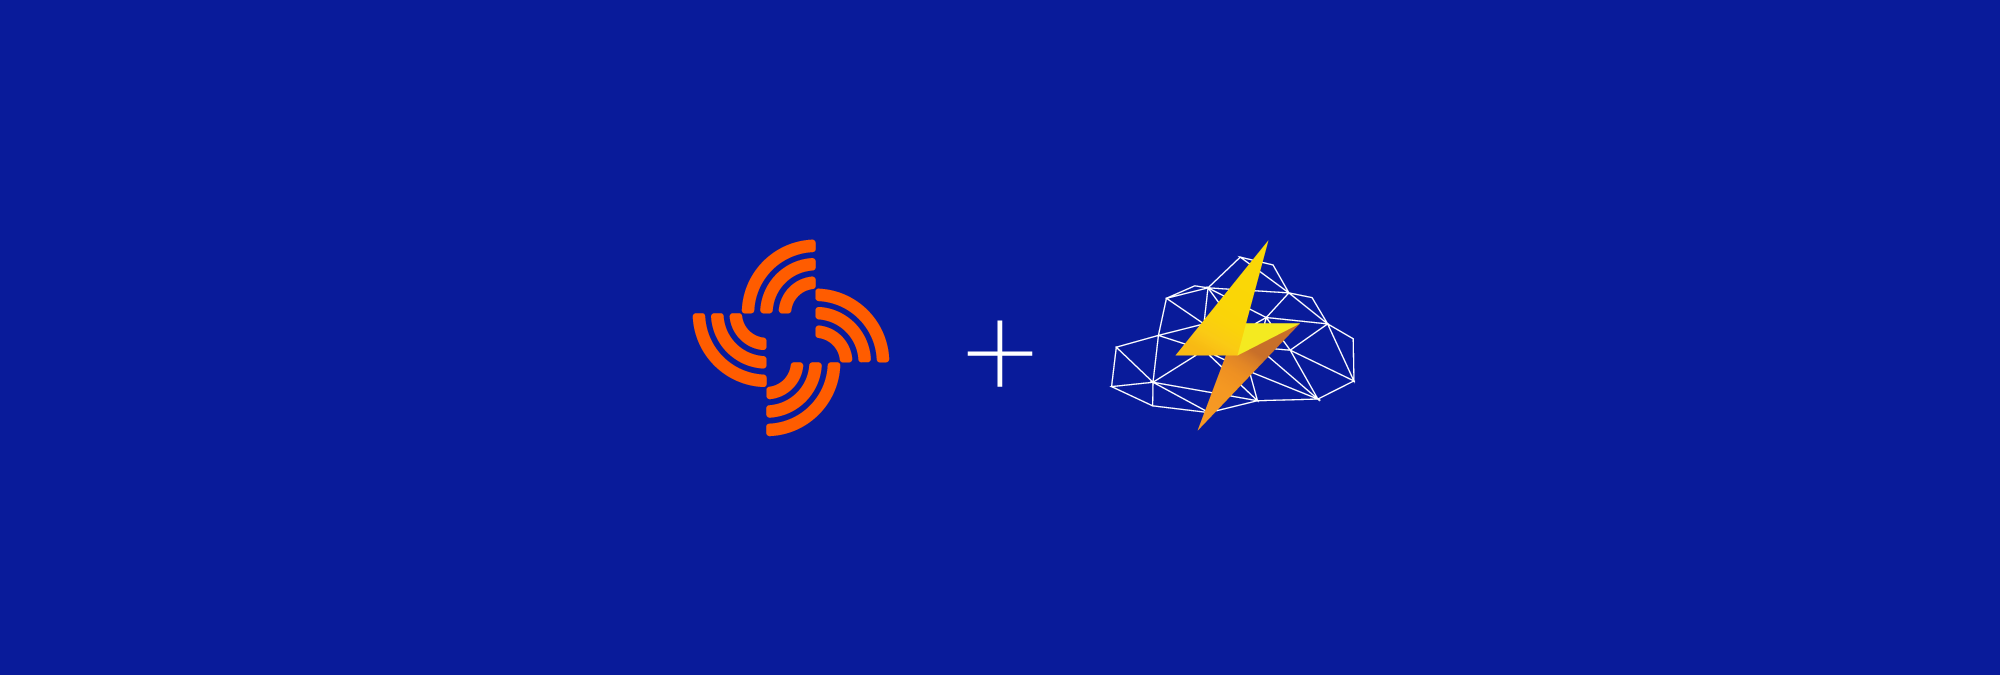 News: Electrify & Streamr partner to give users control over their data